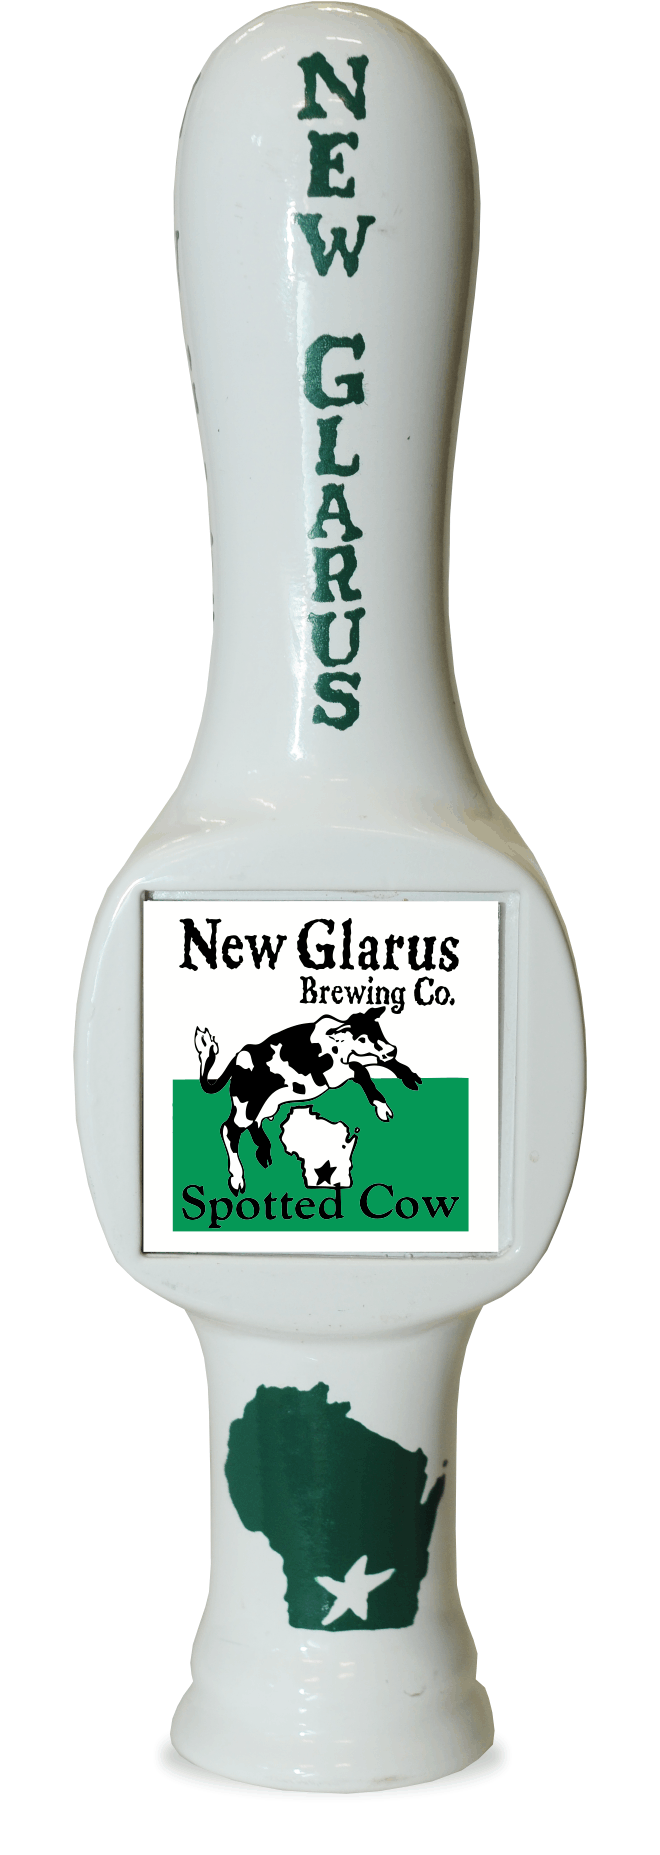 New Glarus Spotted Cow has a beverage tapper!